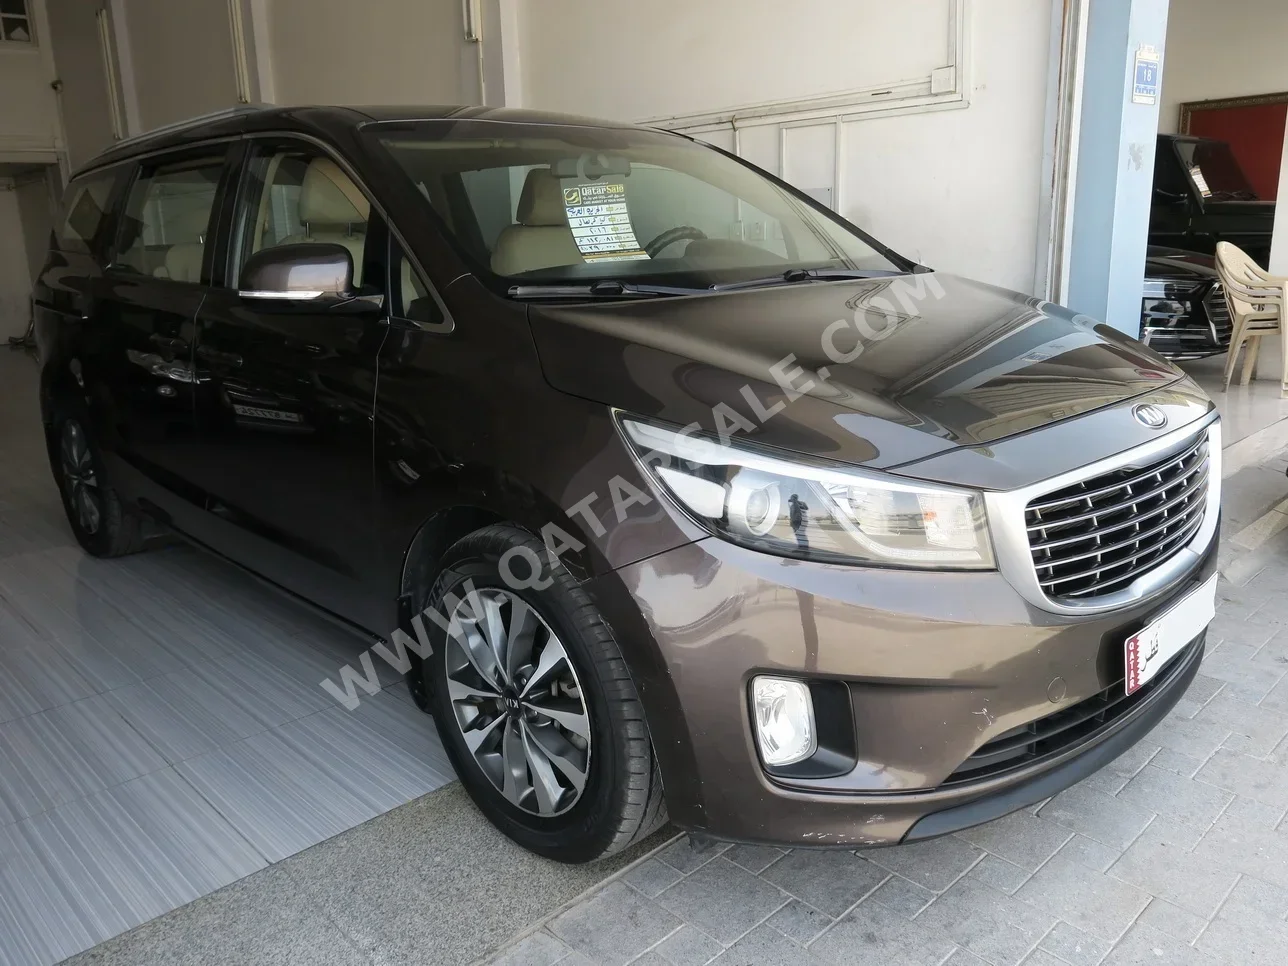 Kia  Carnival  2016  Automatic  112,000 Km  6 Cylinder  Front Wheel Drive (FWD)  Van / Bus  Gray